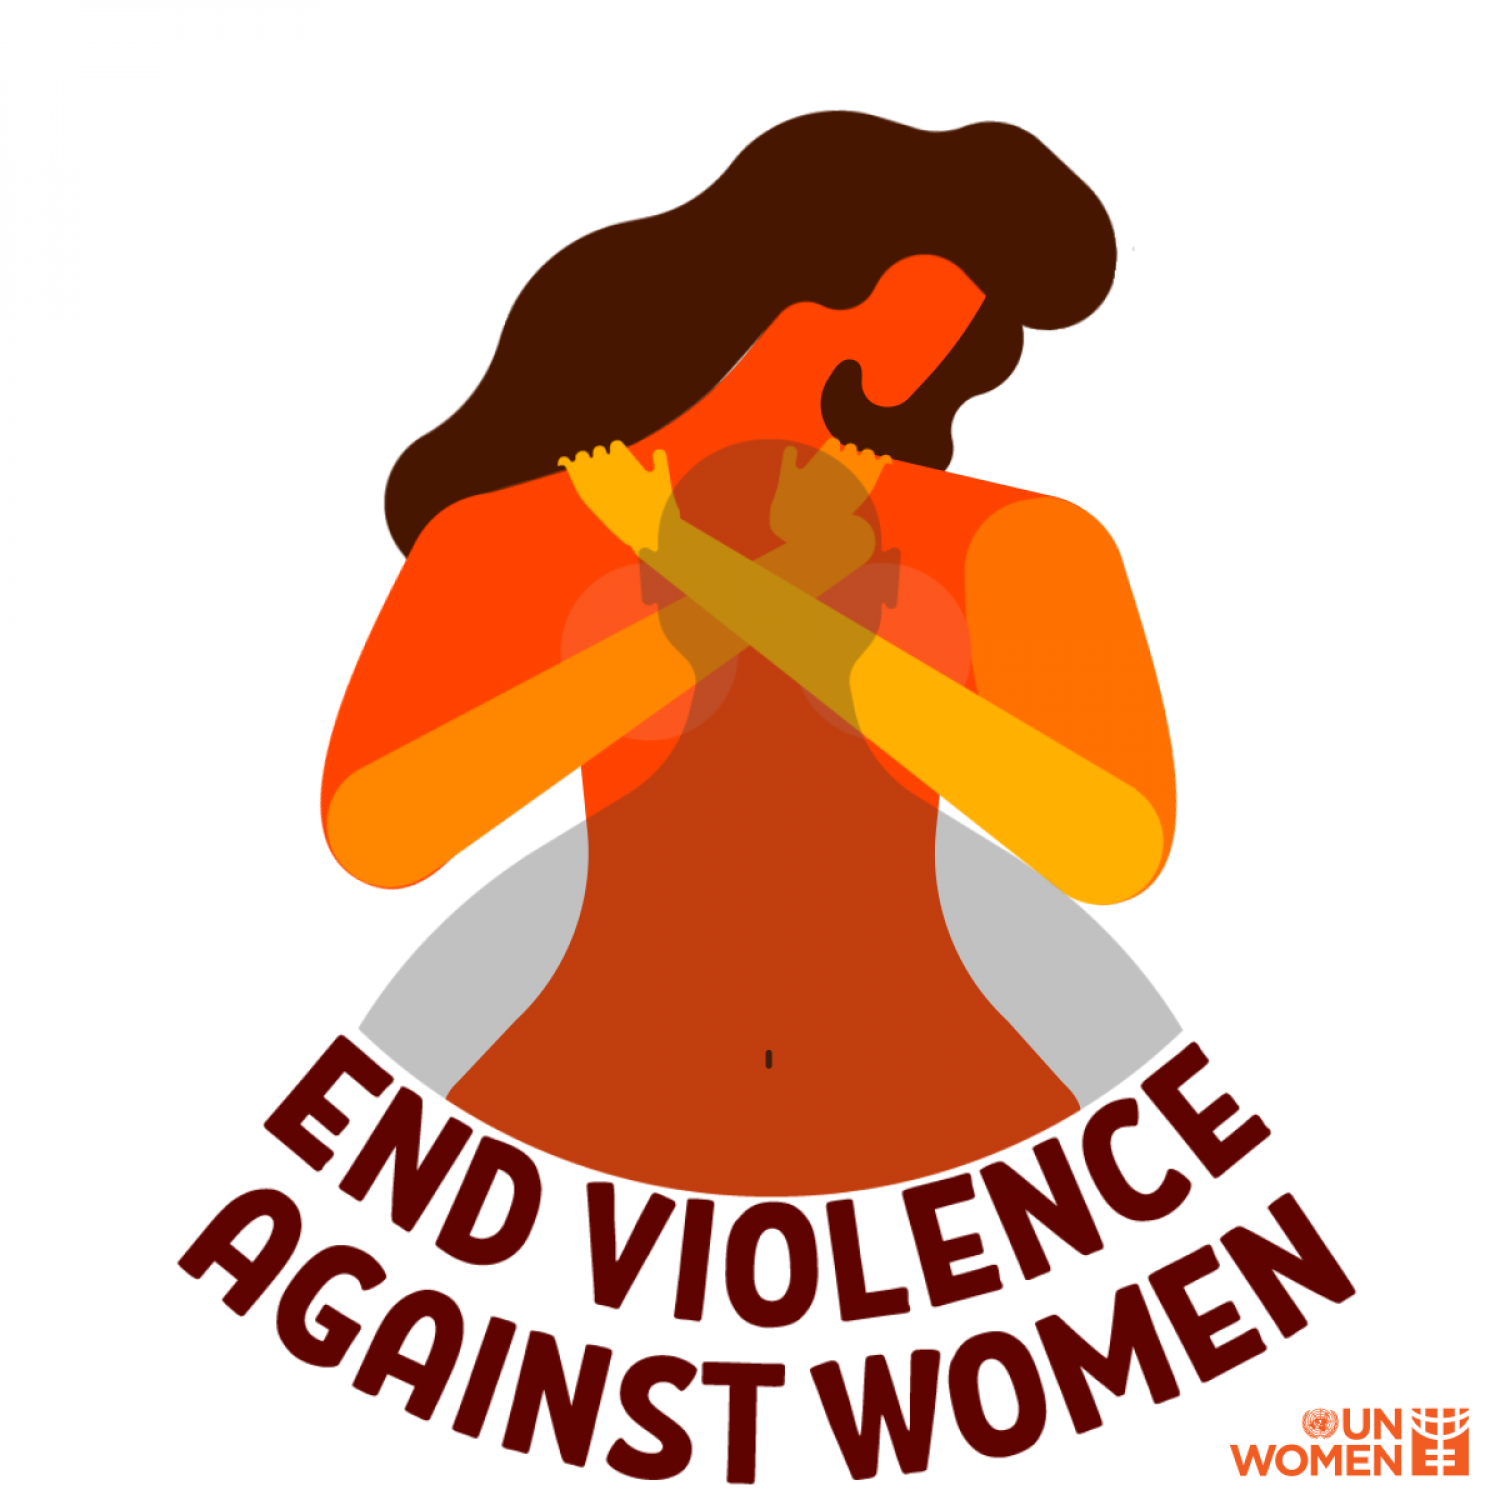 Women's right to live without fear of violence and discrimination.